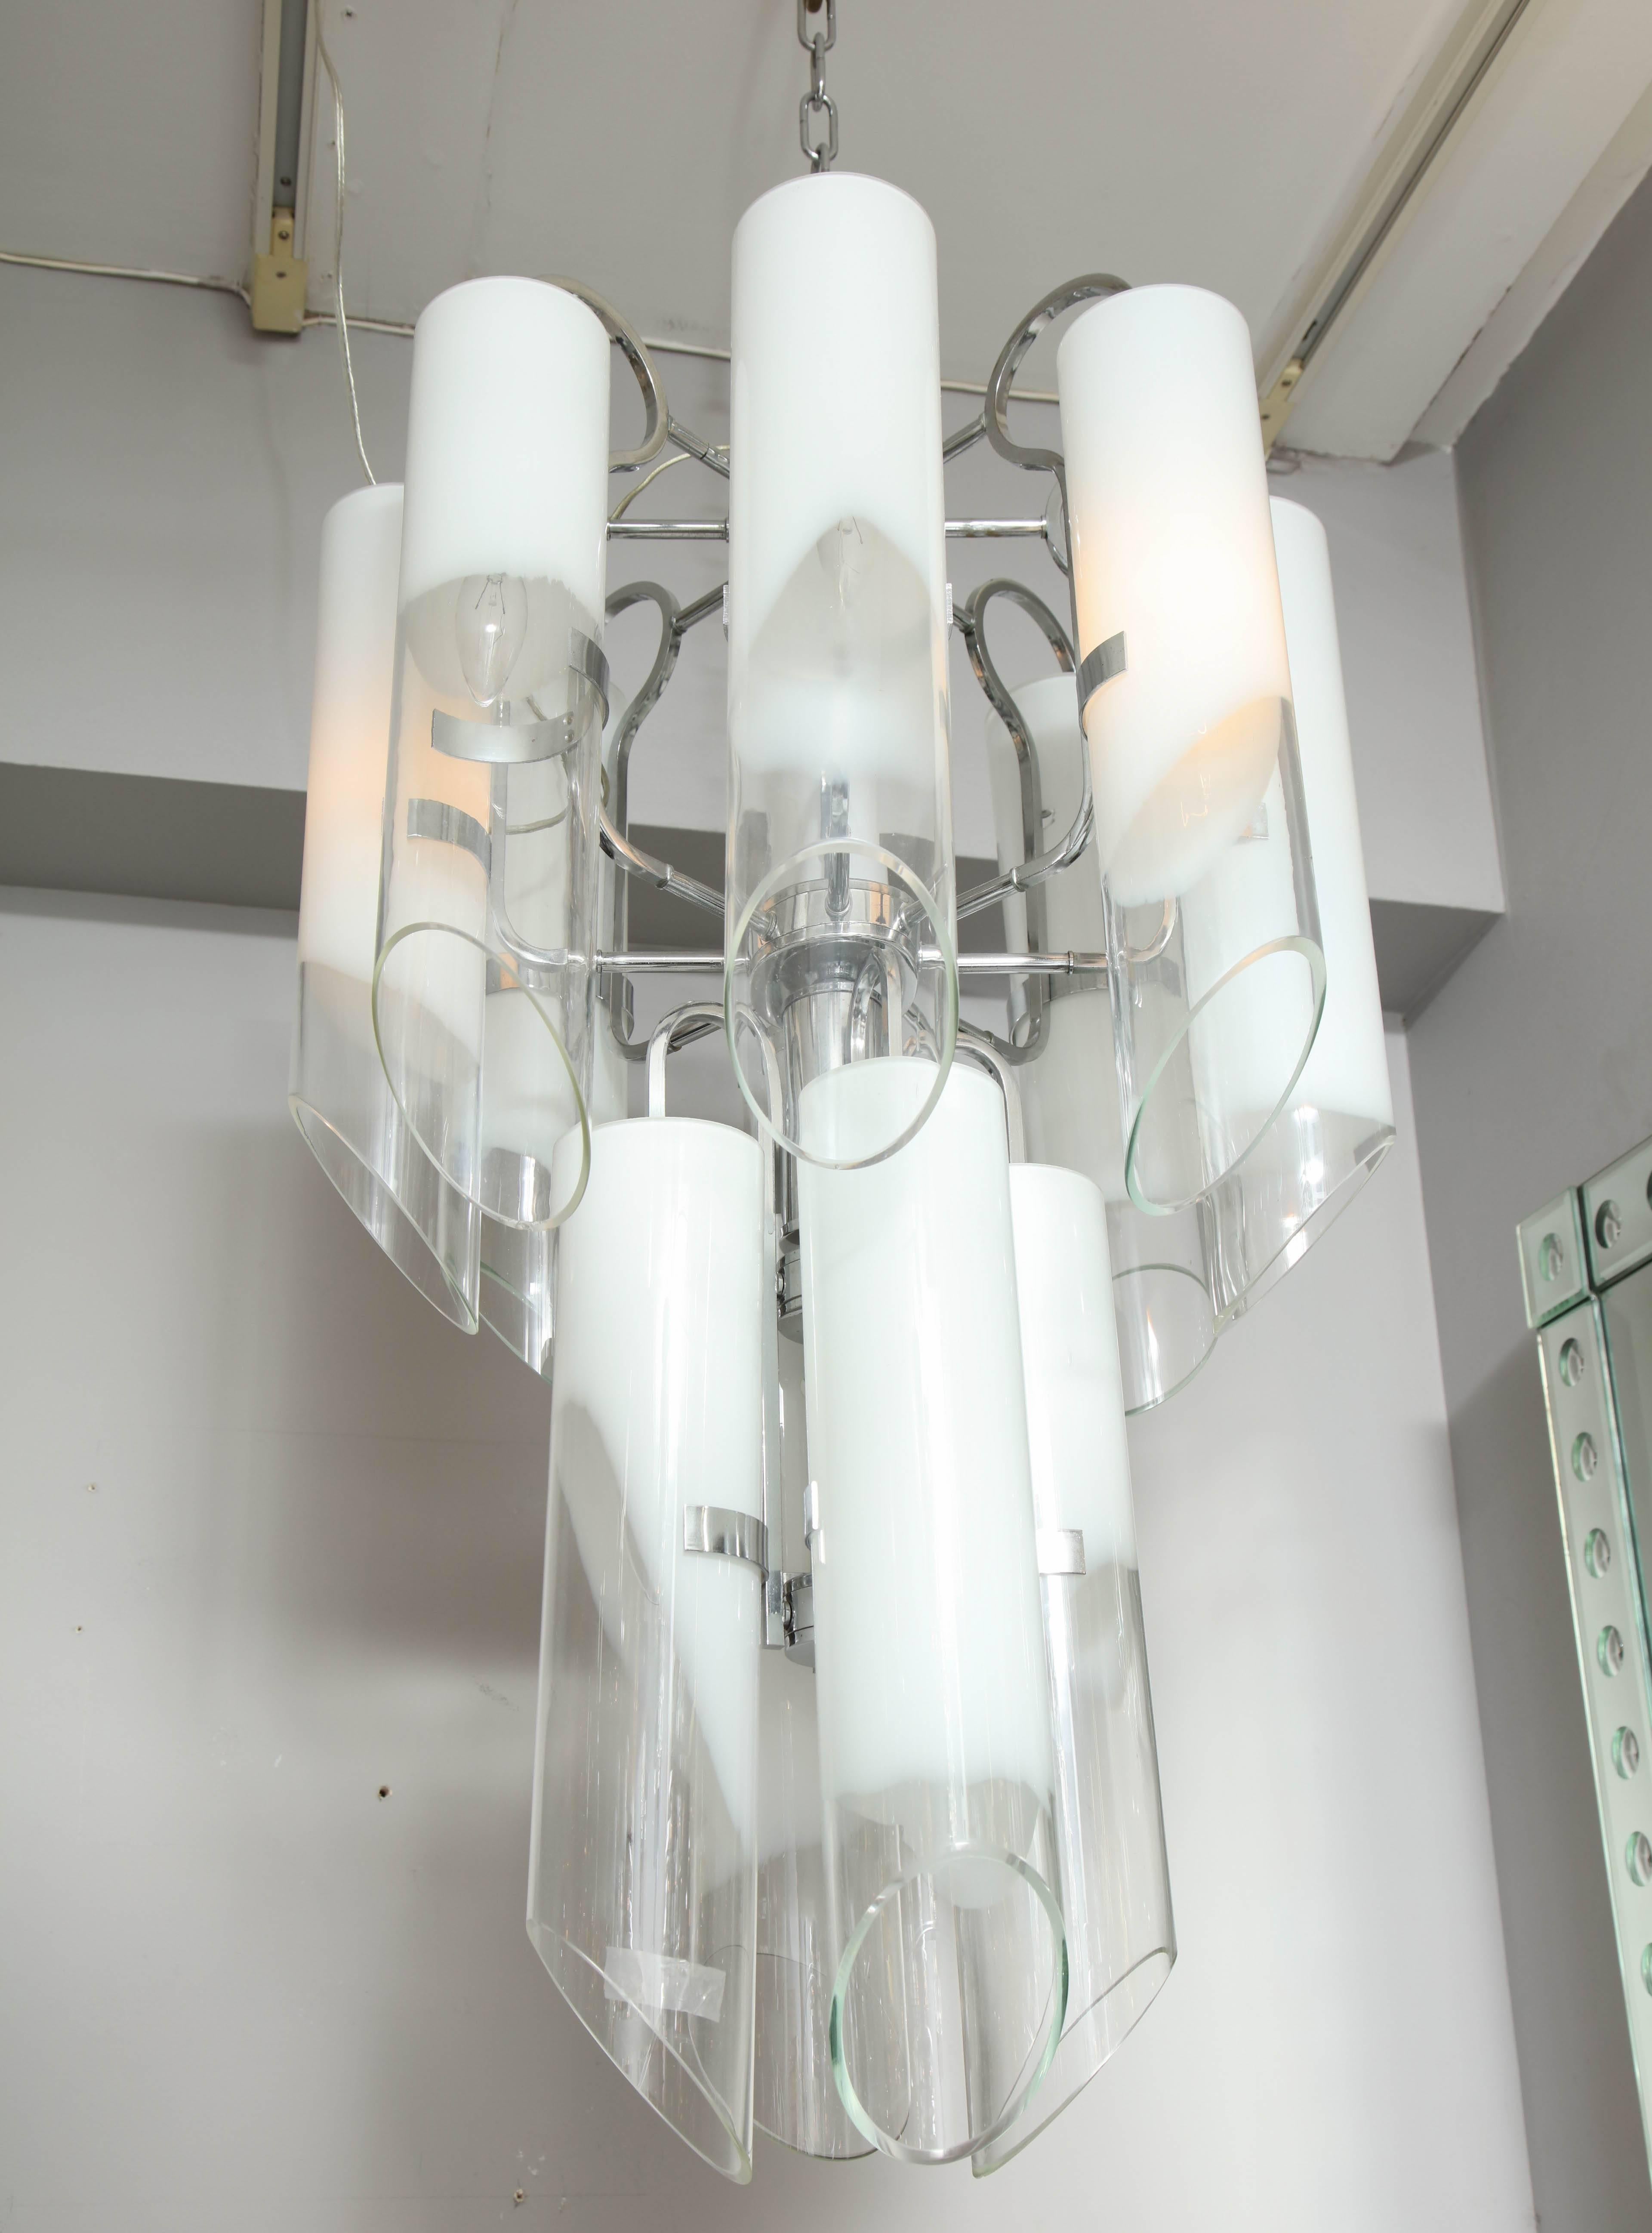 Vintage white Mazzega tubular glass chandelier. There is a light socket inside of each tubular glass to illuminate. Minimum aging shows on the frame.